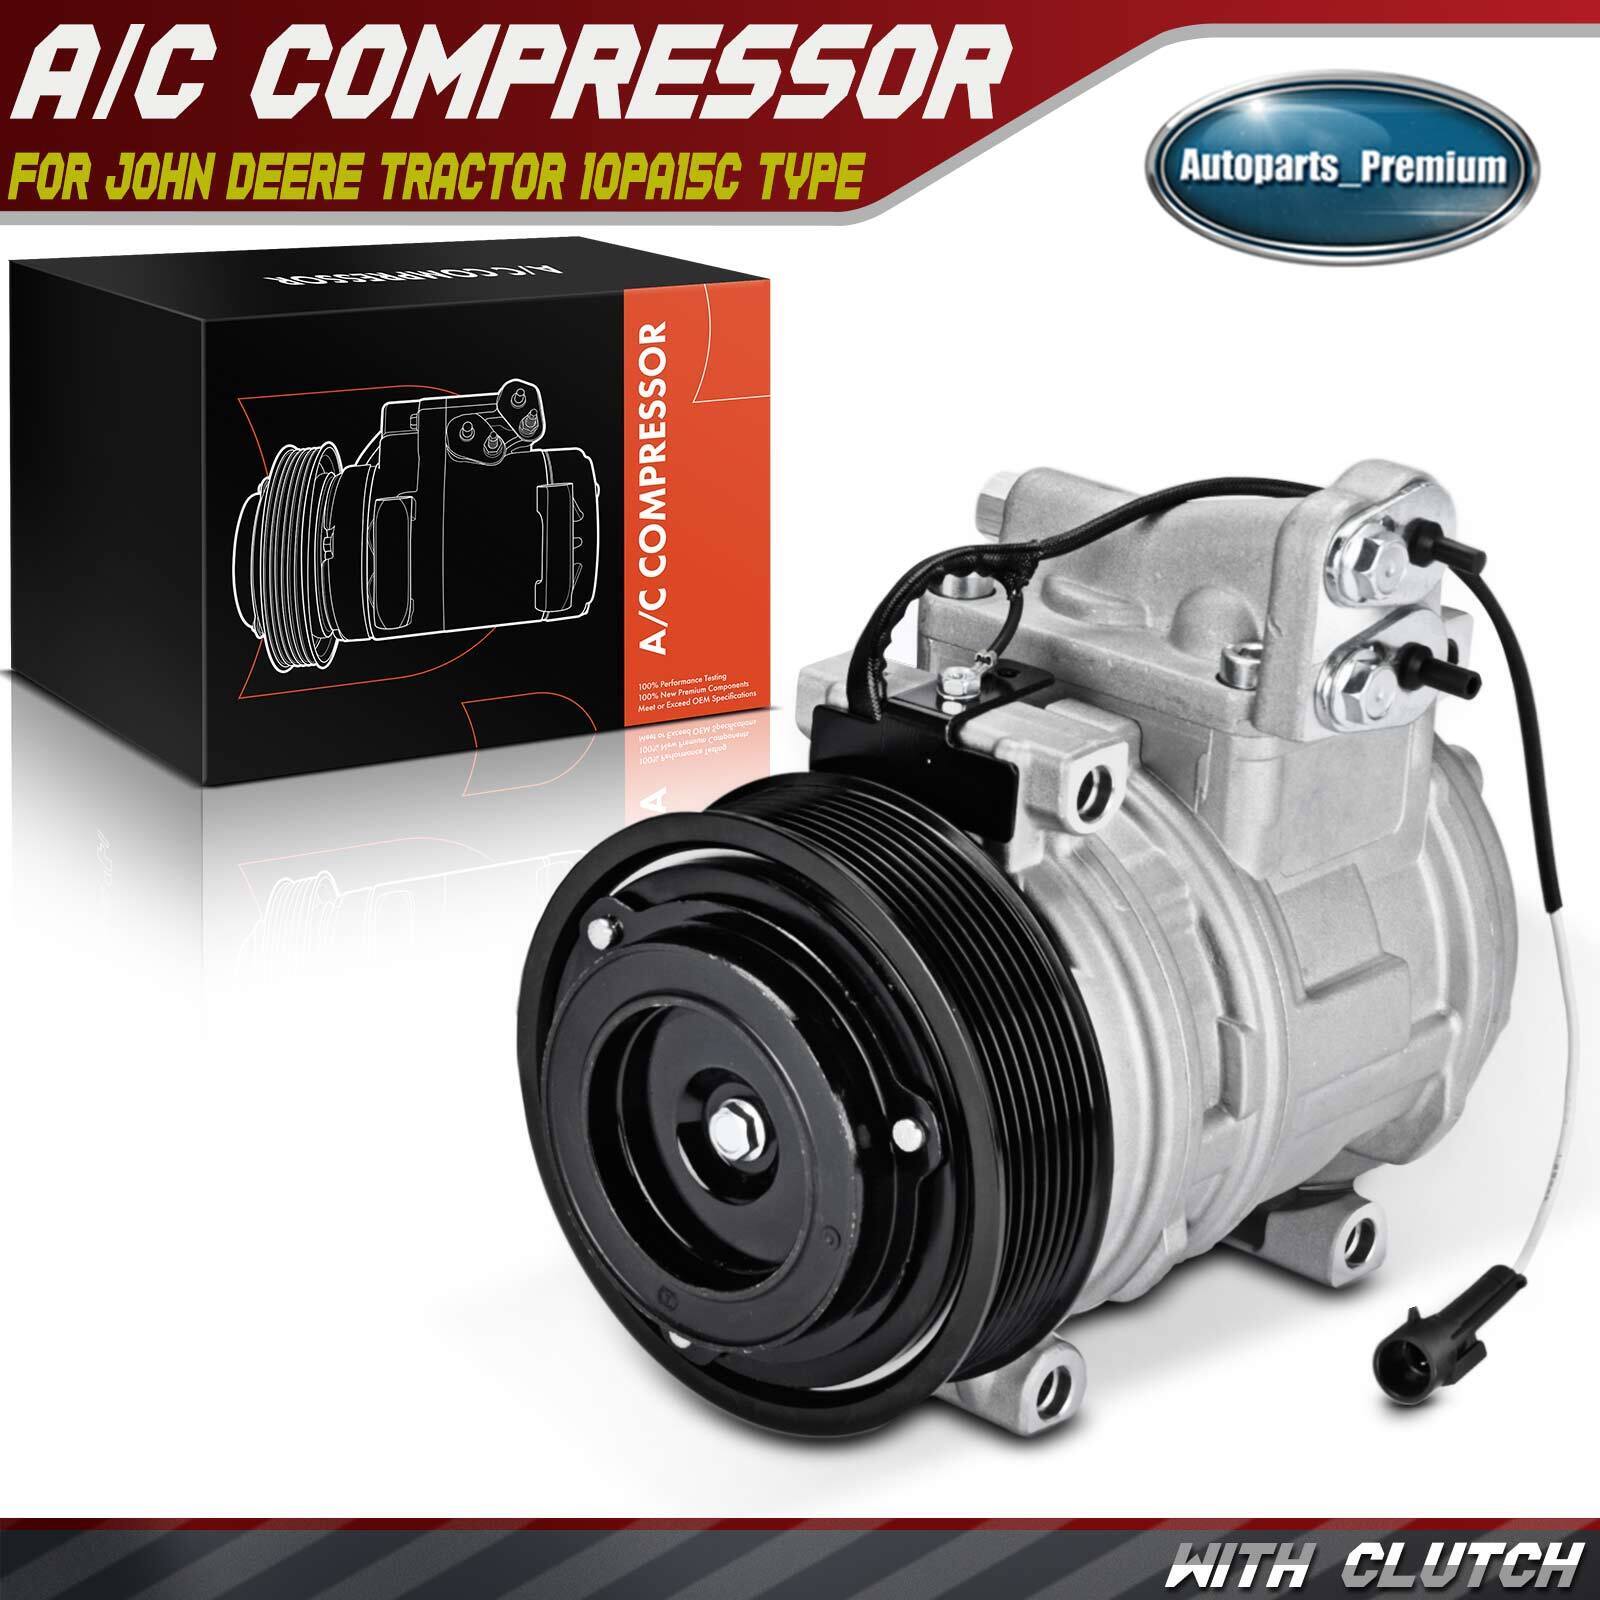 Air Conditioning A/C Compressor with Clutch for John Deere Tractor 10PA15C Type